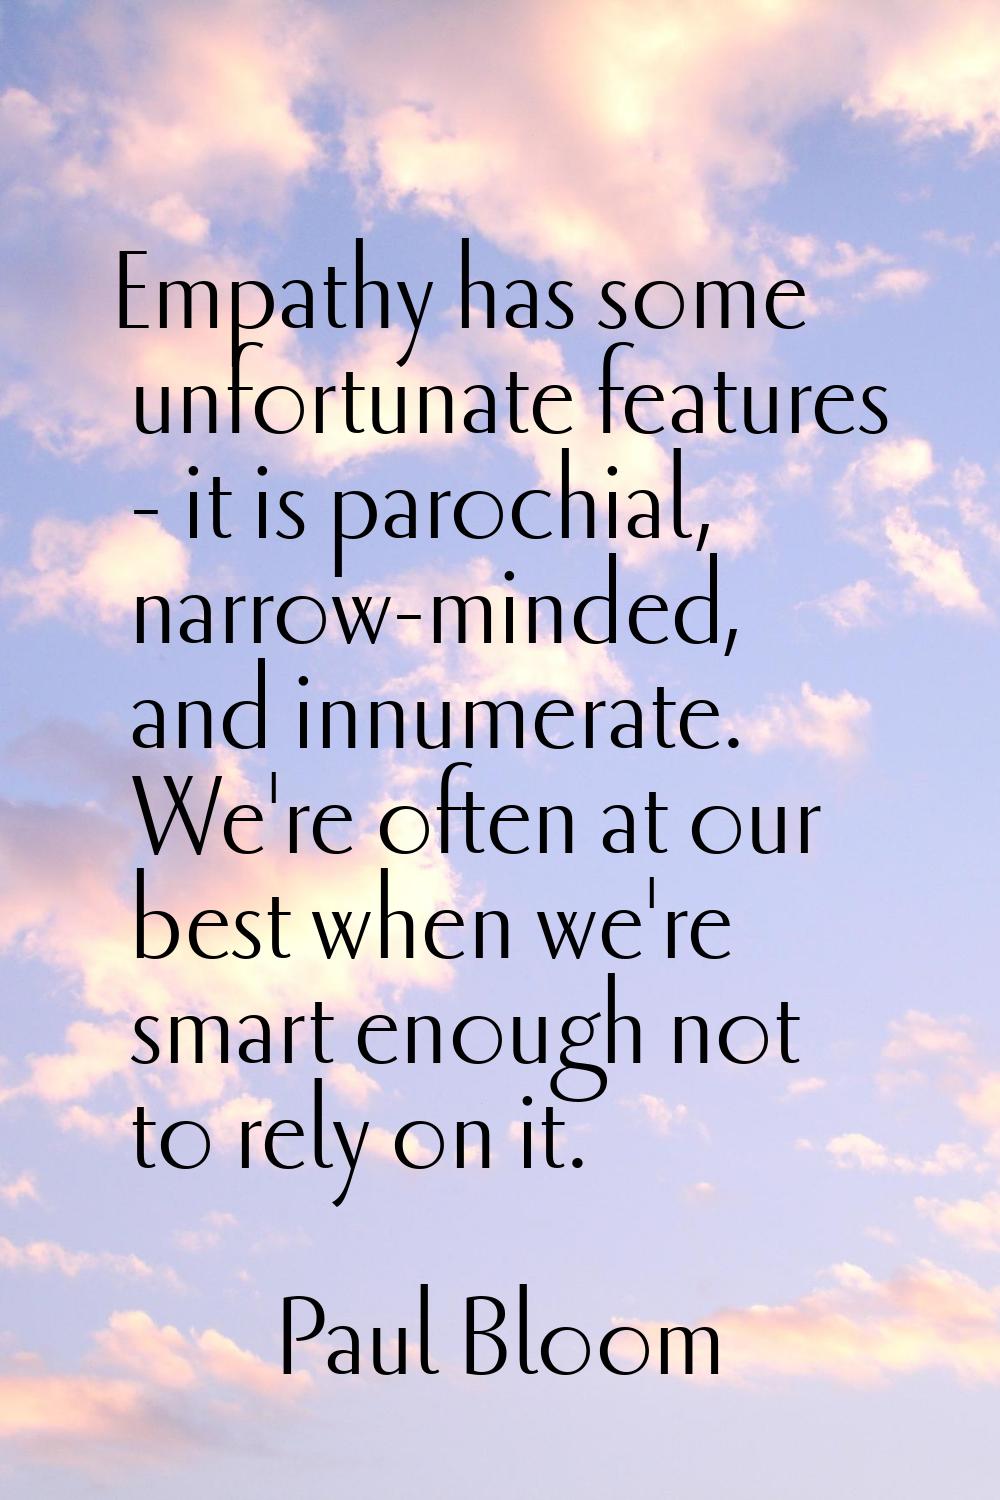 Empathy has some unfortunate features - it is parochial, narrow-minded, and innumerate. We're often